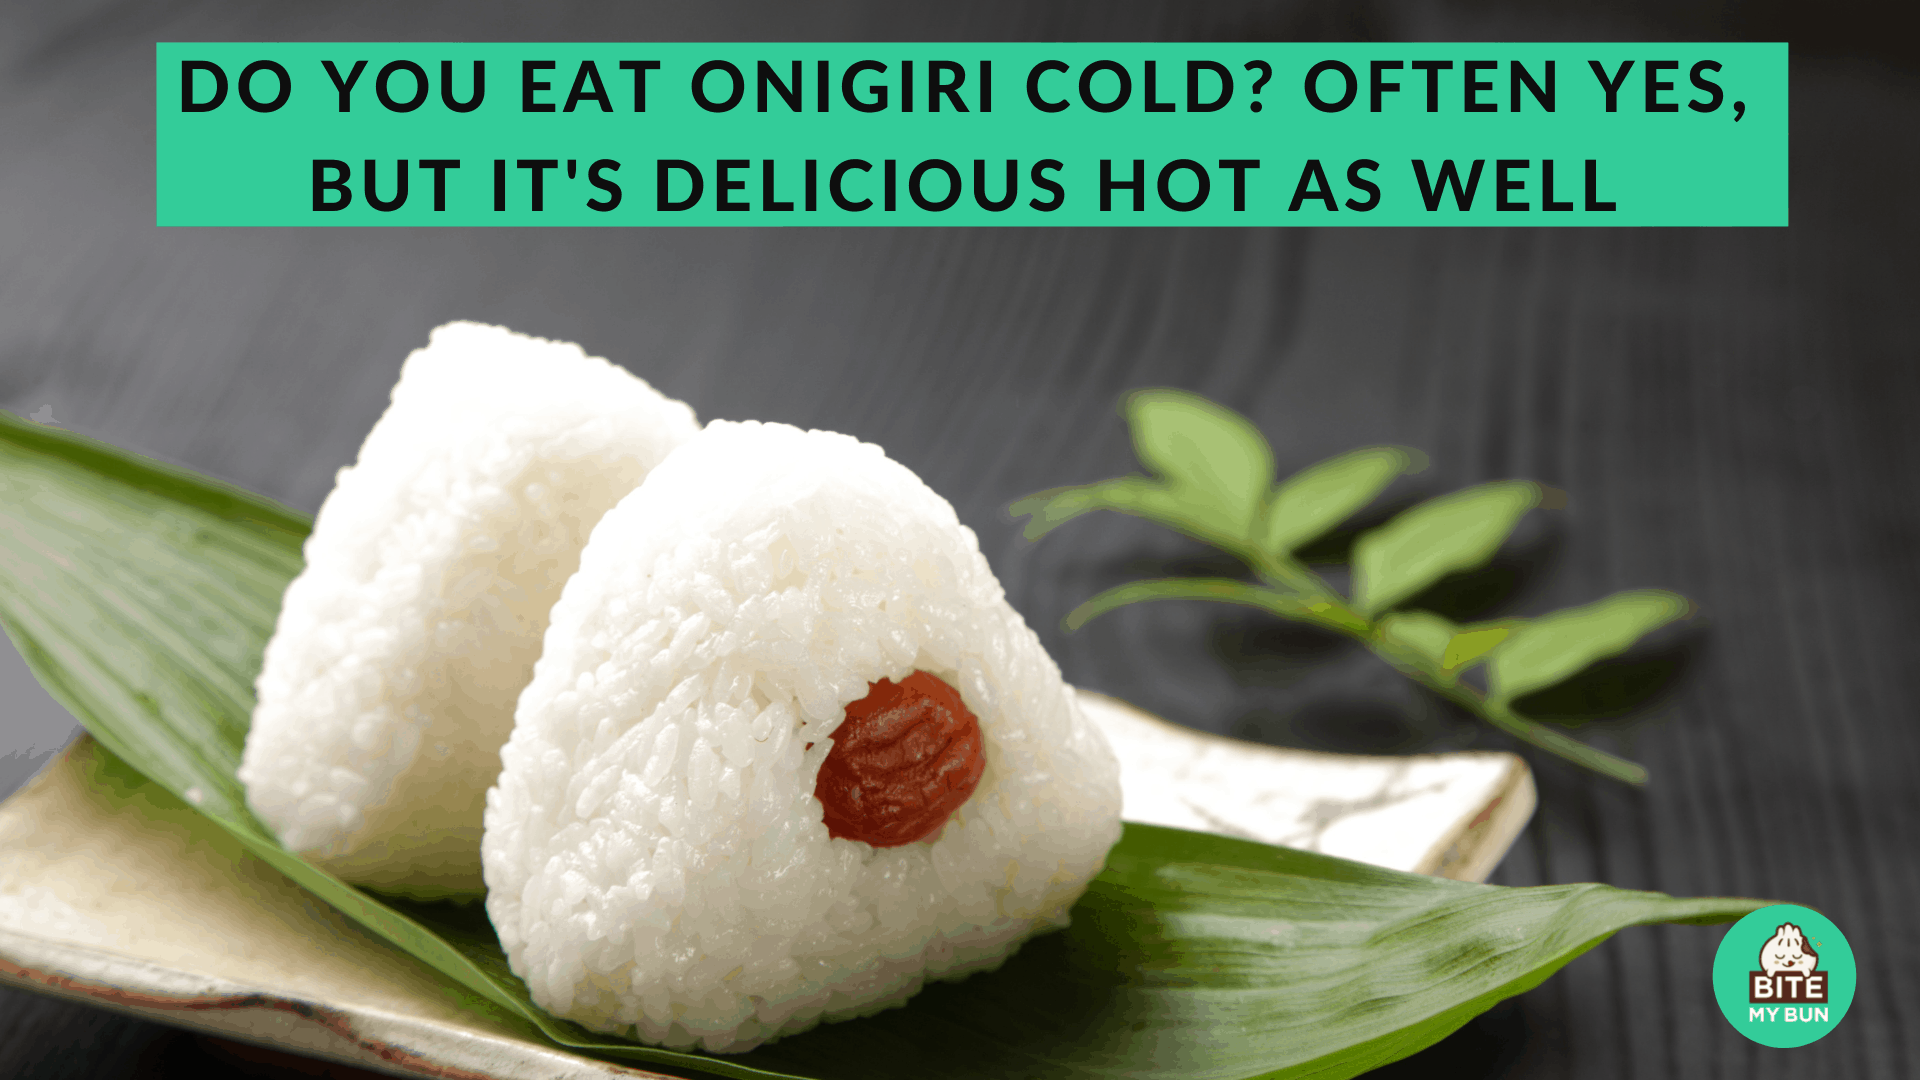 Do you eat onigiri cold? Often yes, but it's delicious hot as well